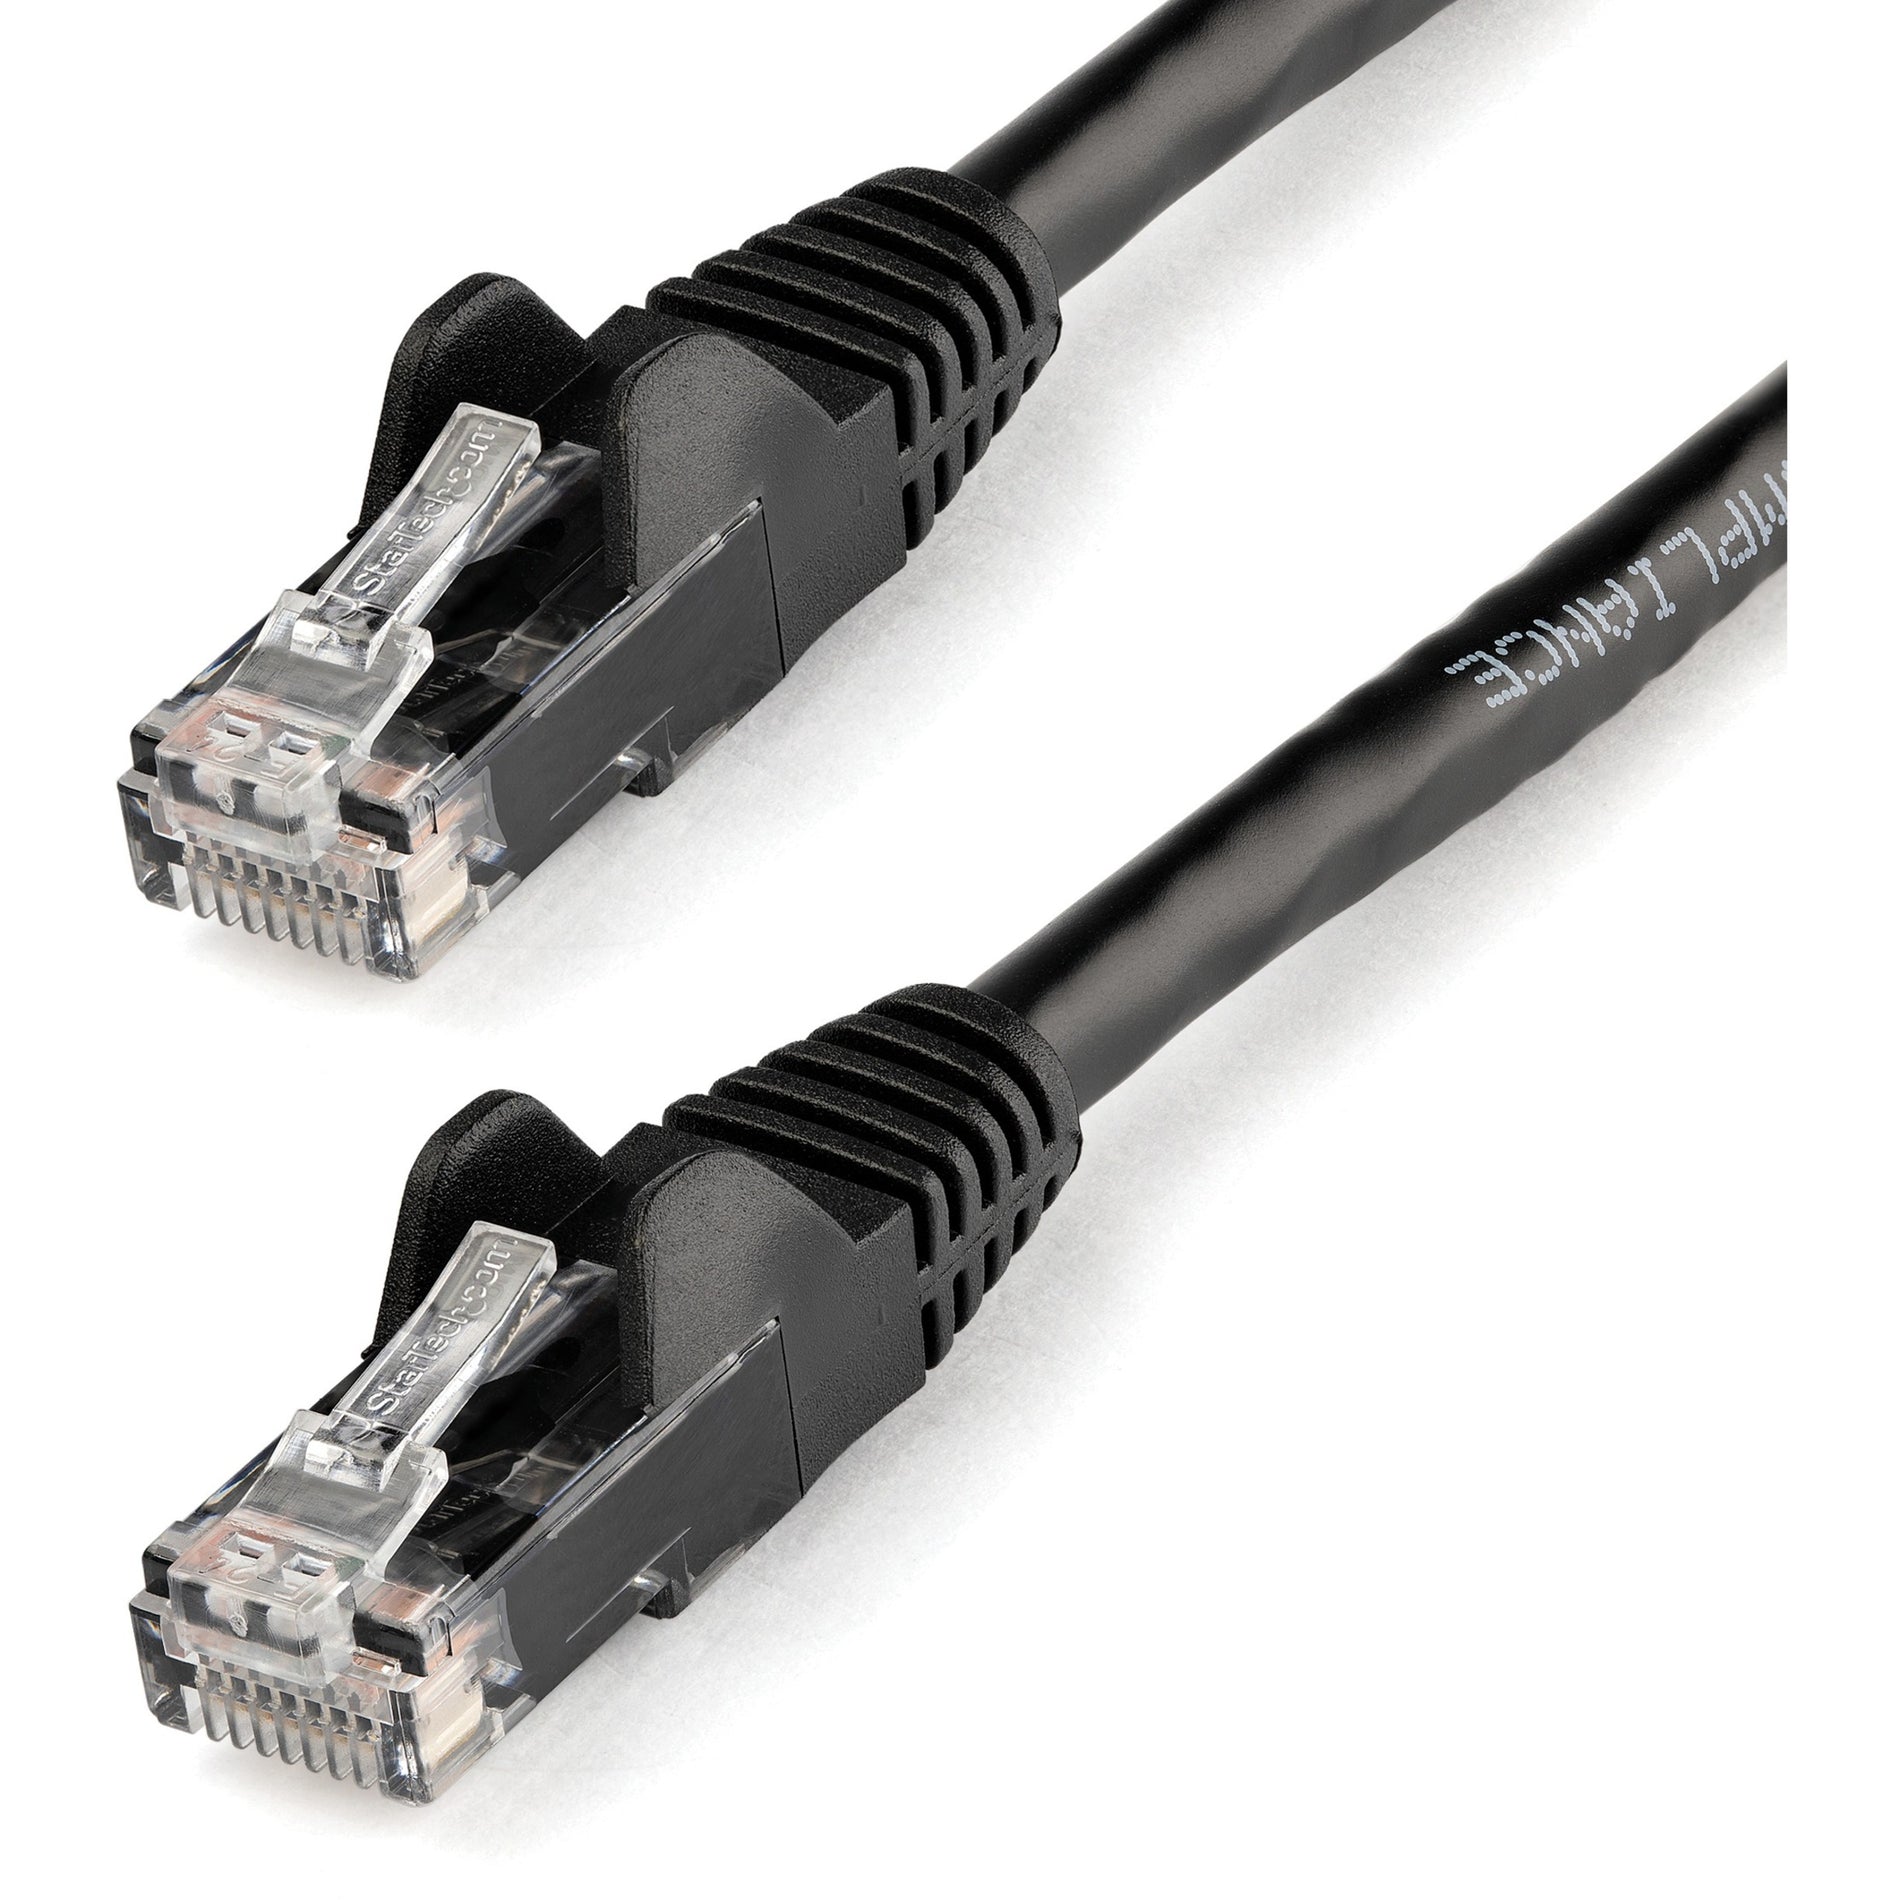 StarTech.com N6PATCH100BK 100 ft Black Snagless Cat6 UTP Patch Cable PoE 10 Gbit/s Data Transfer Rate